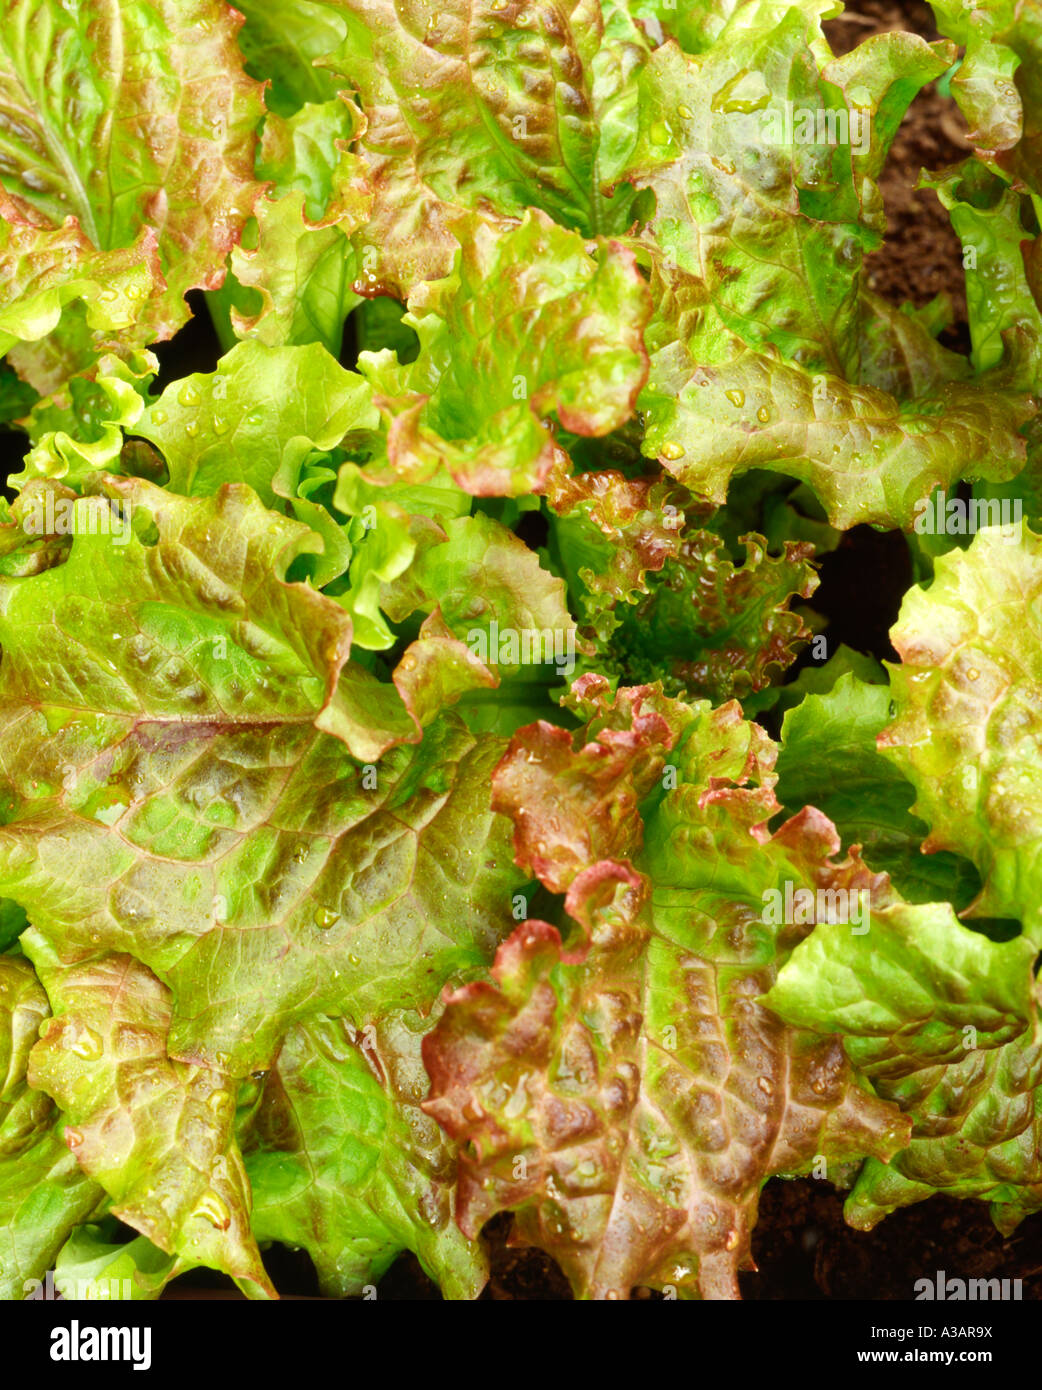 Lettuce Plant, Asteraceae family, Closeup of leaves ready for harvest for salad Stock Photo